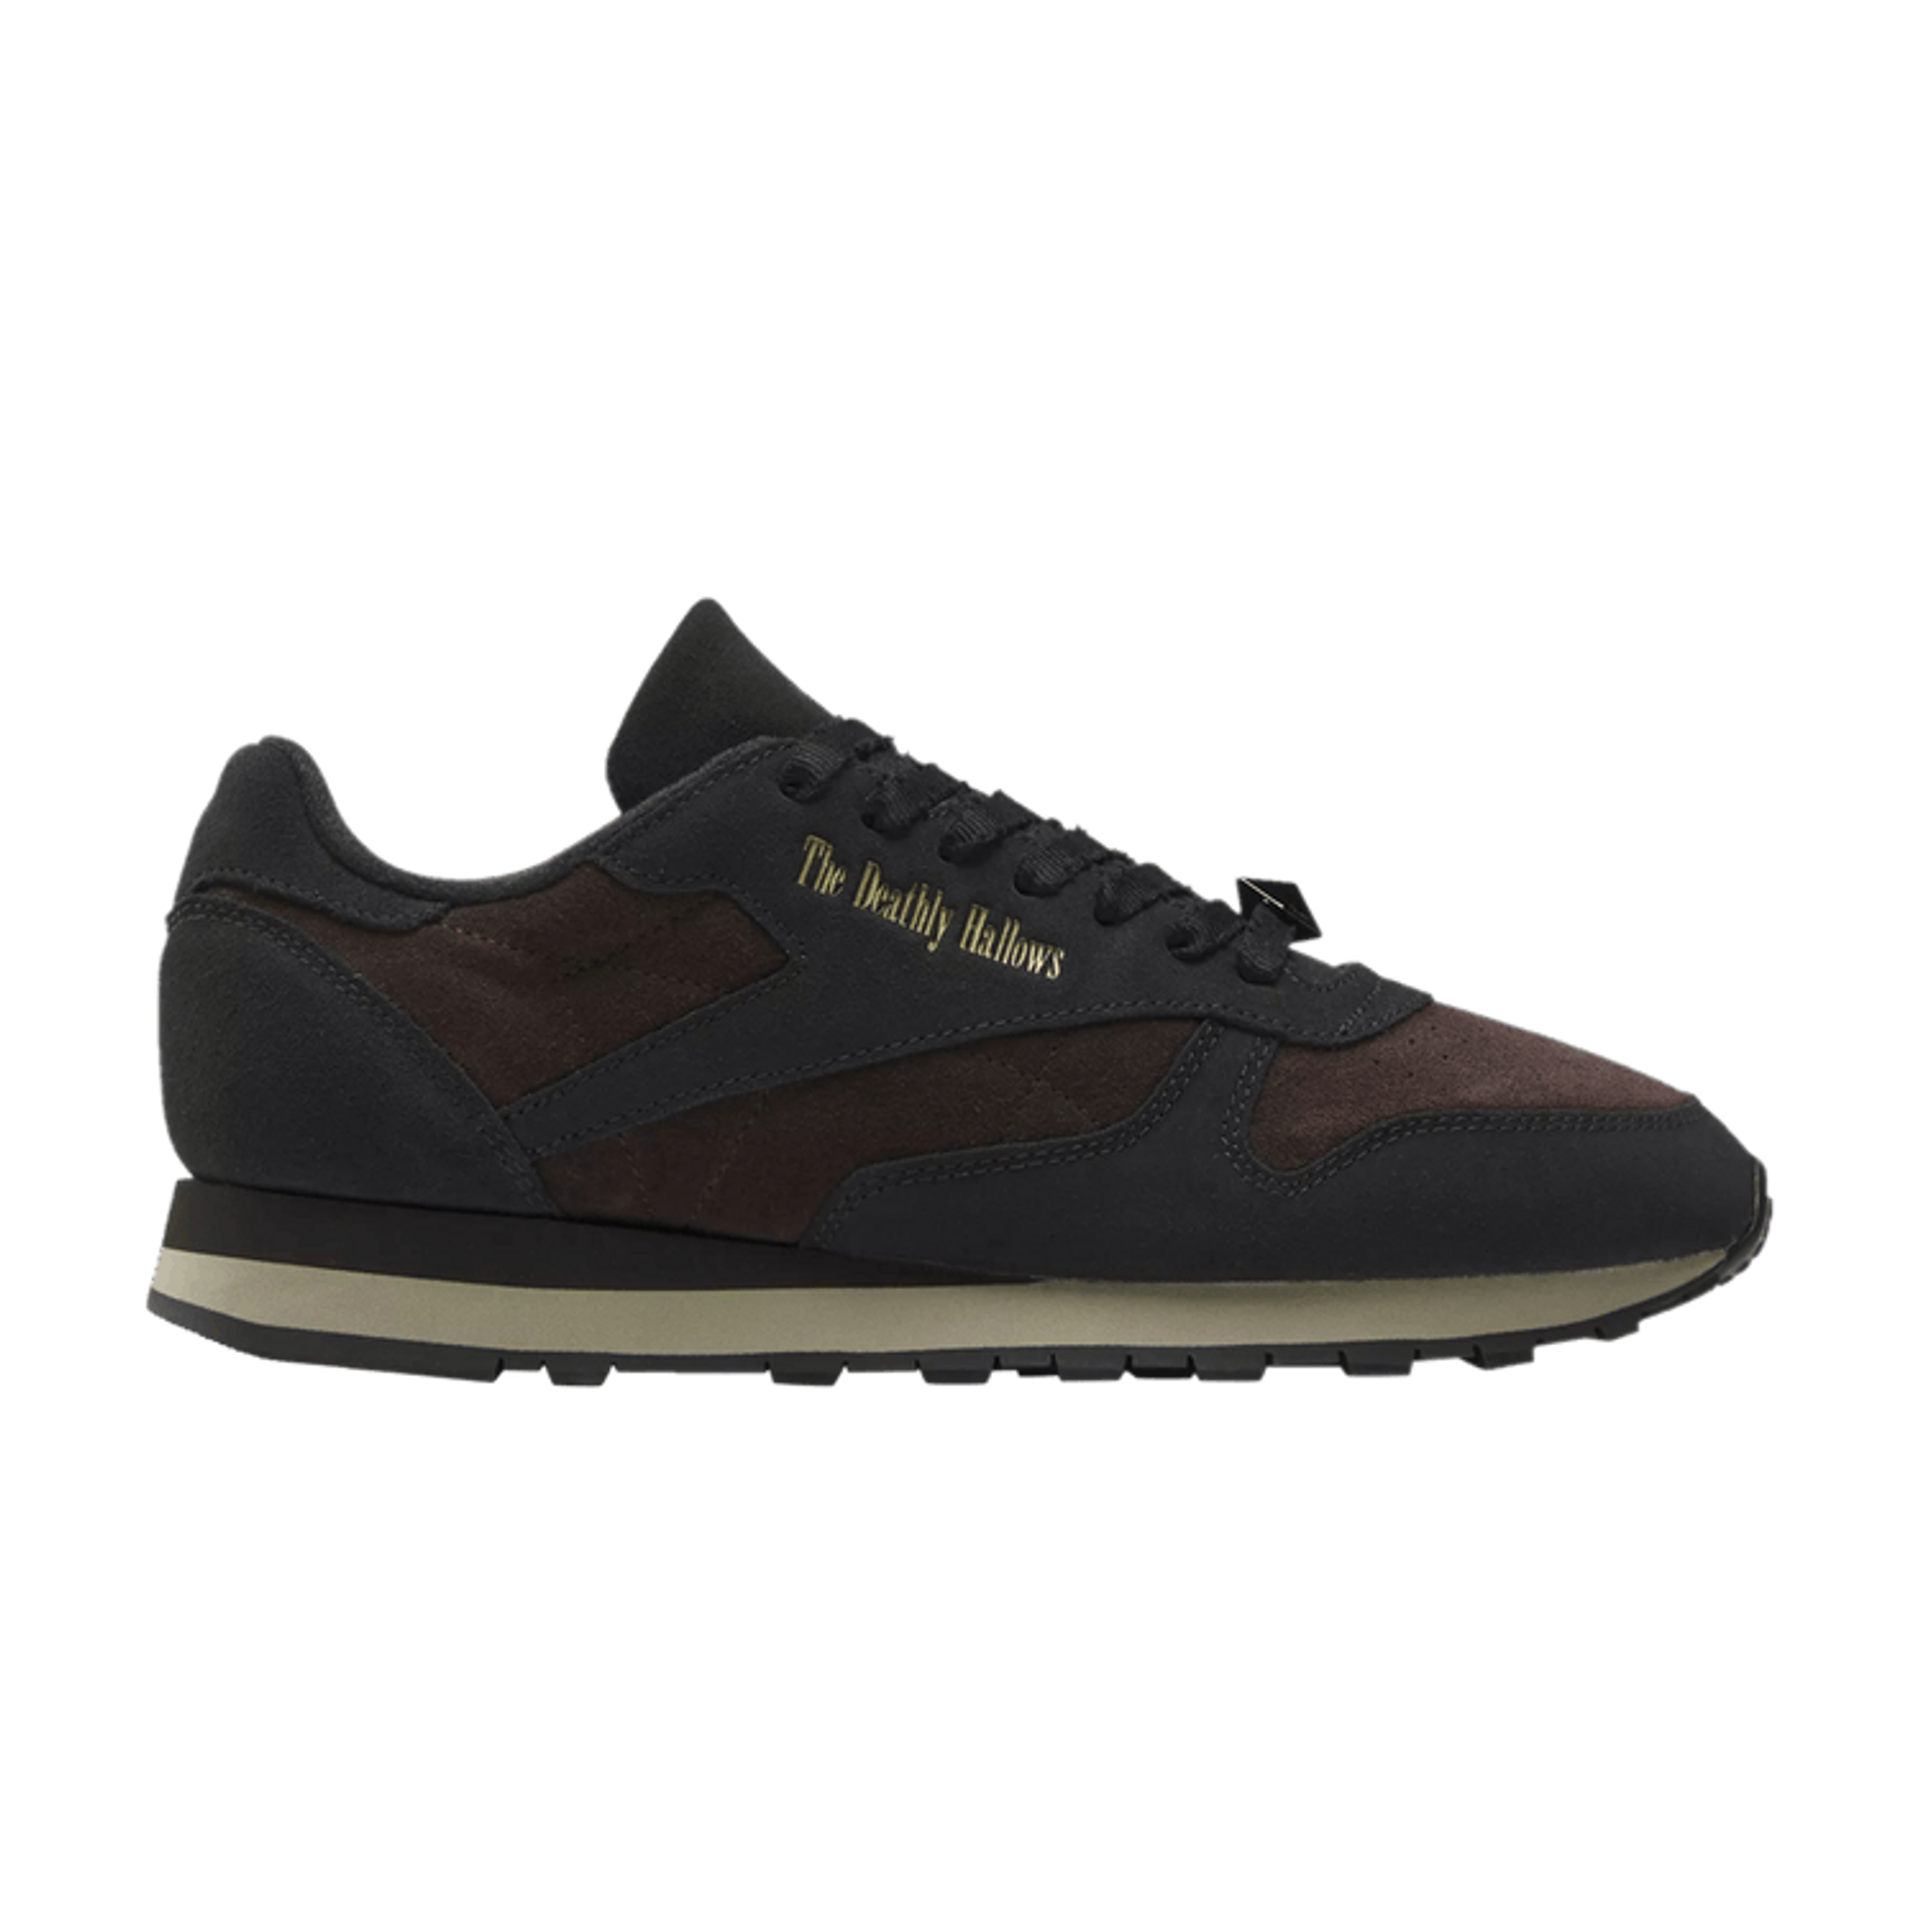 Harry Potter x Reebok Classic Leather 'Deathly Hallows'